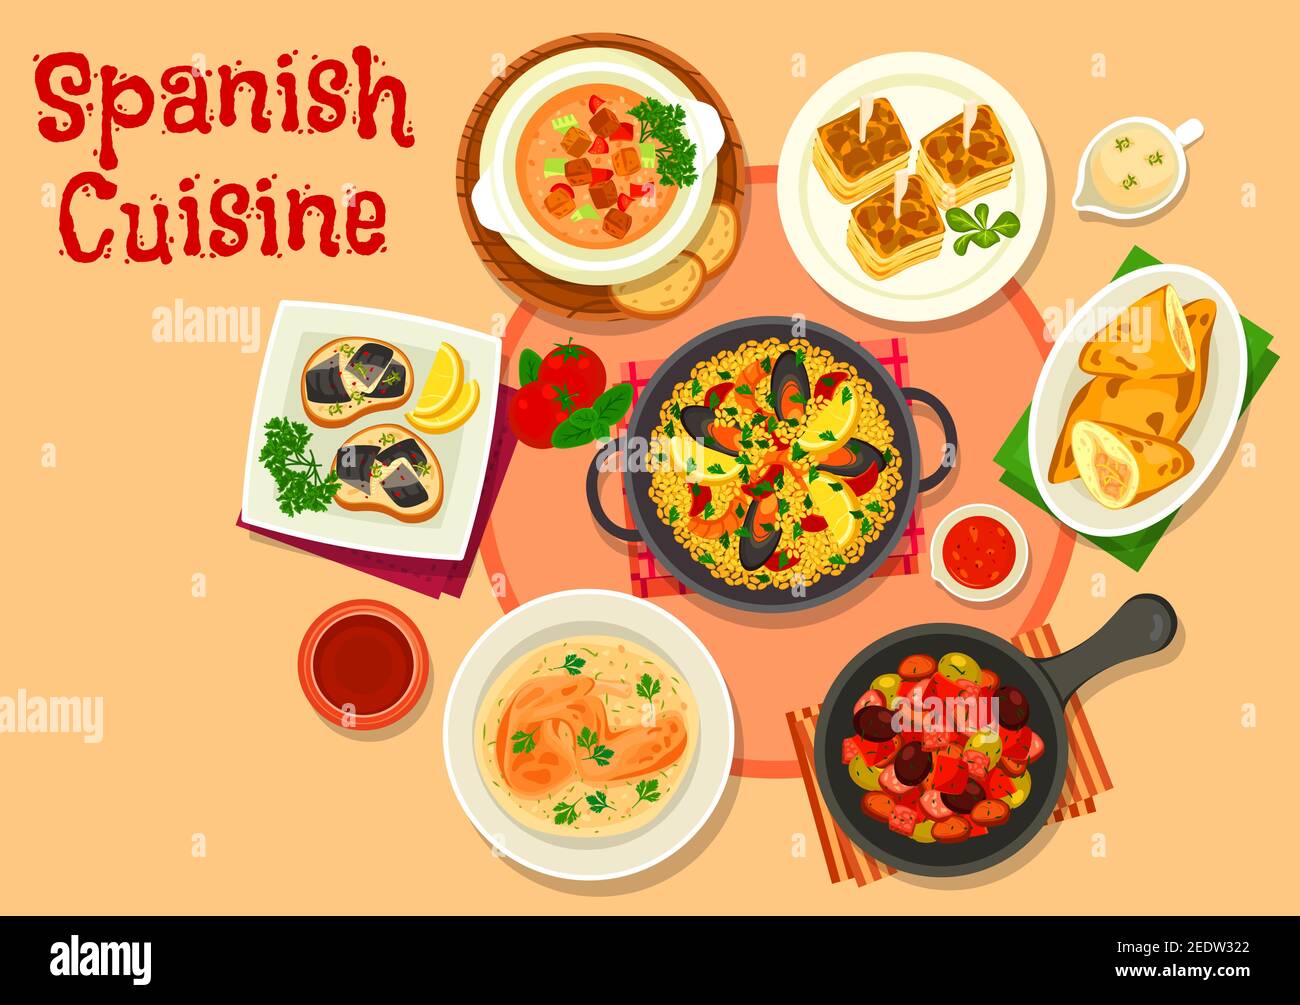 Spanish cuisine healthy dinner dishes icon with seafood paella, fish tapas escabeche, olive stew with sausage, tomato vegetable soup gazpacho, potato Stock Vector